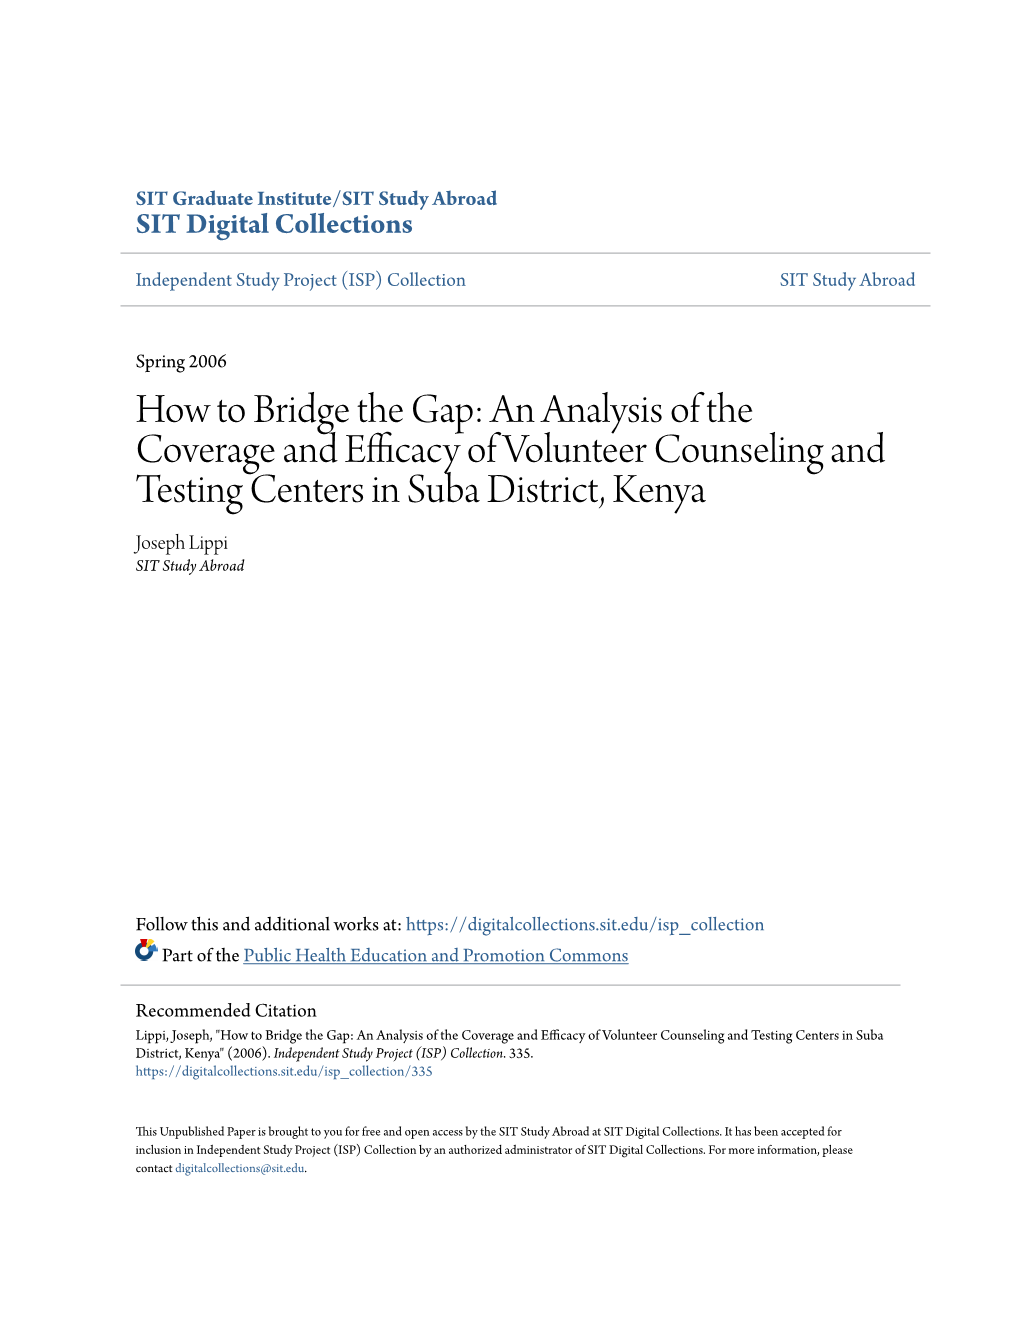 How to Bridge the Gap: an Analysis of the Coverage and Efficacy of Volunteer Counseling and Testing Centers in Suba District, Kenya Joseph Lippi SIT Study Abroad